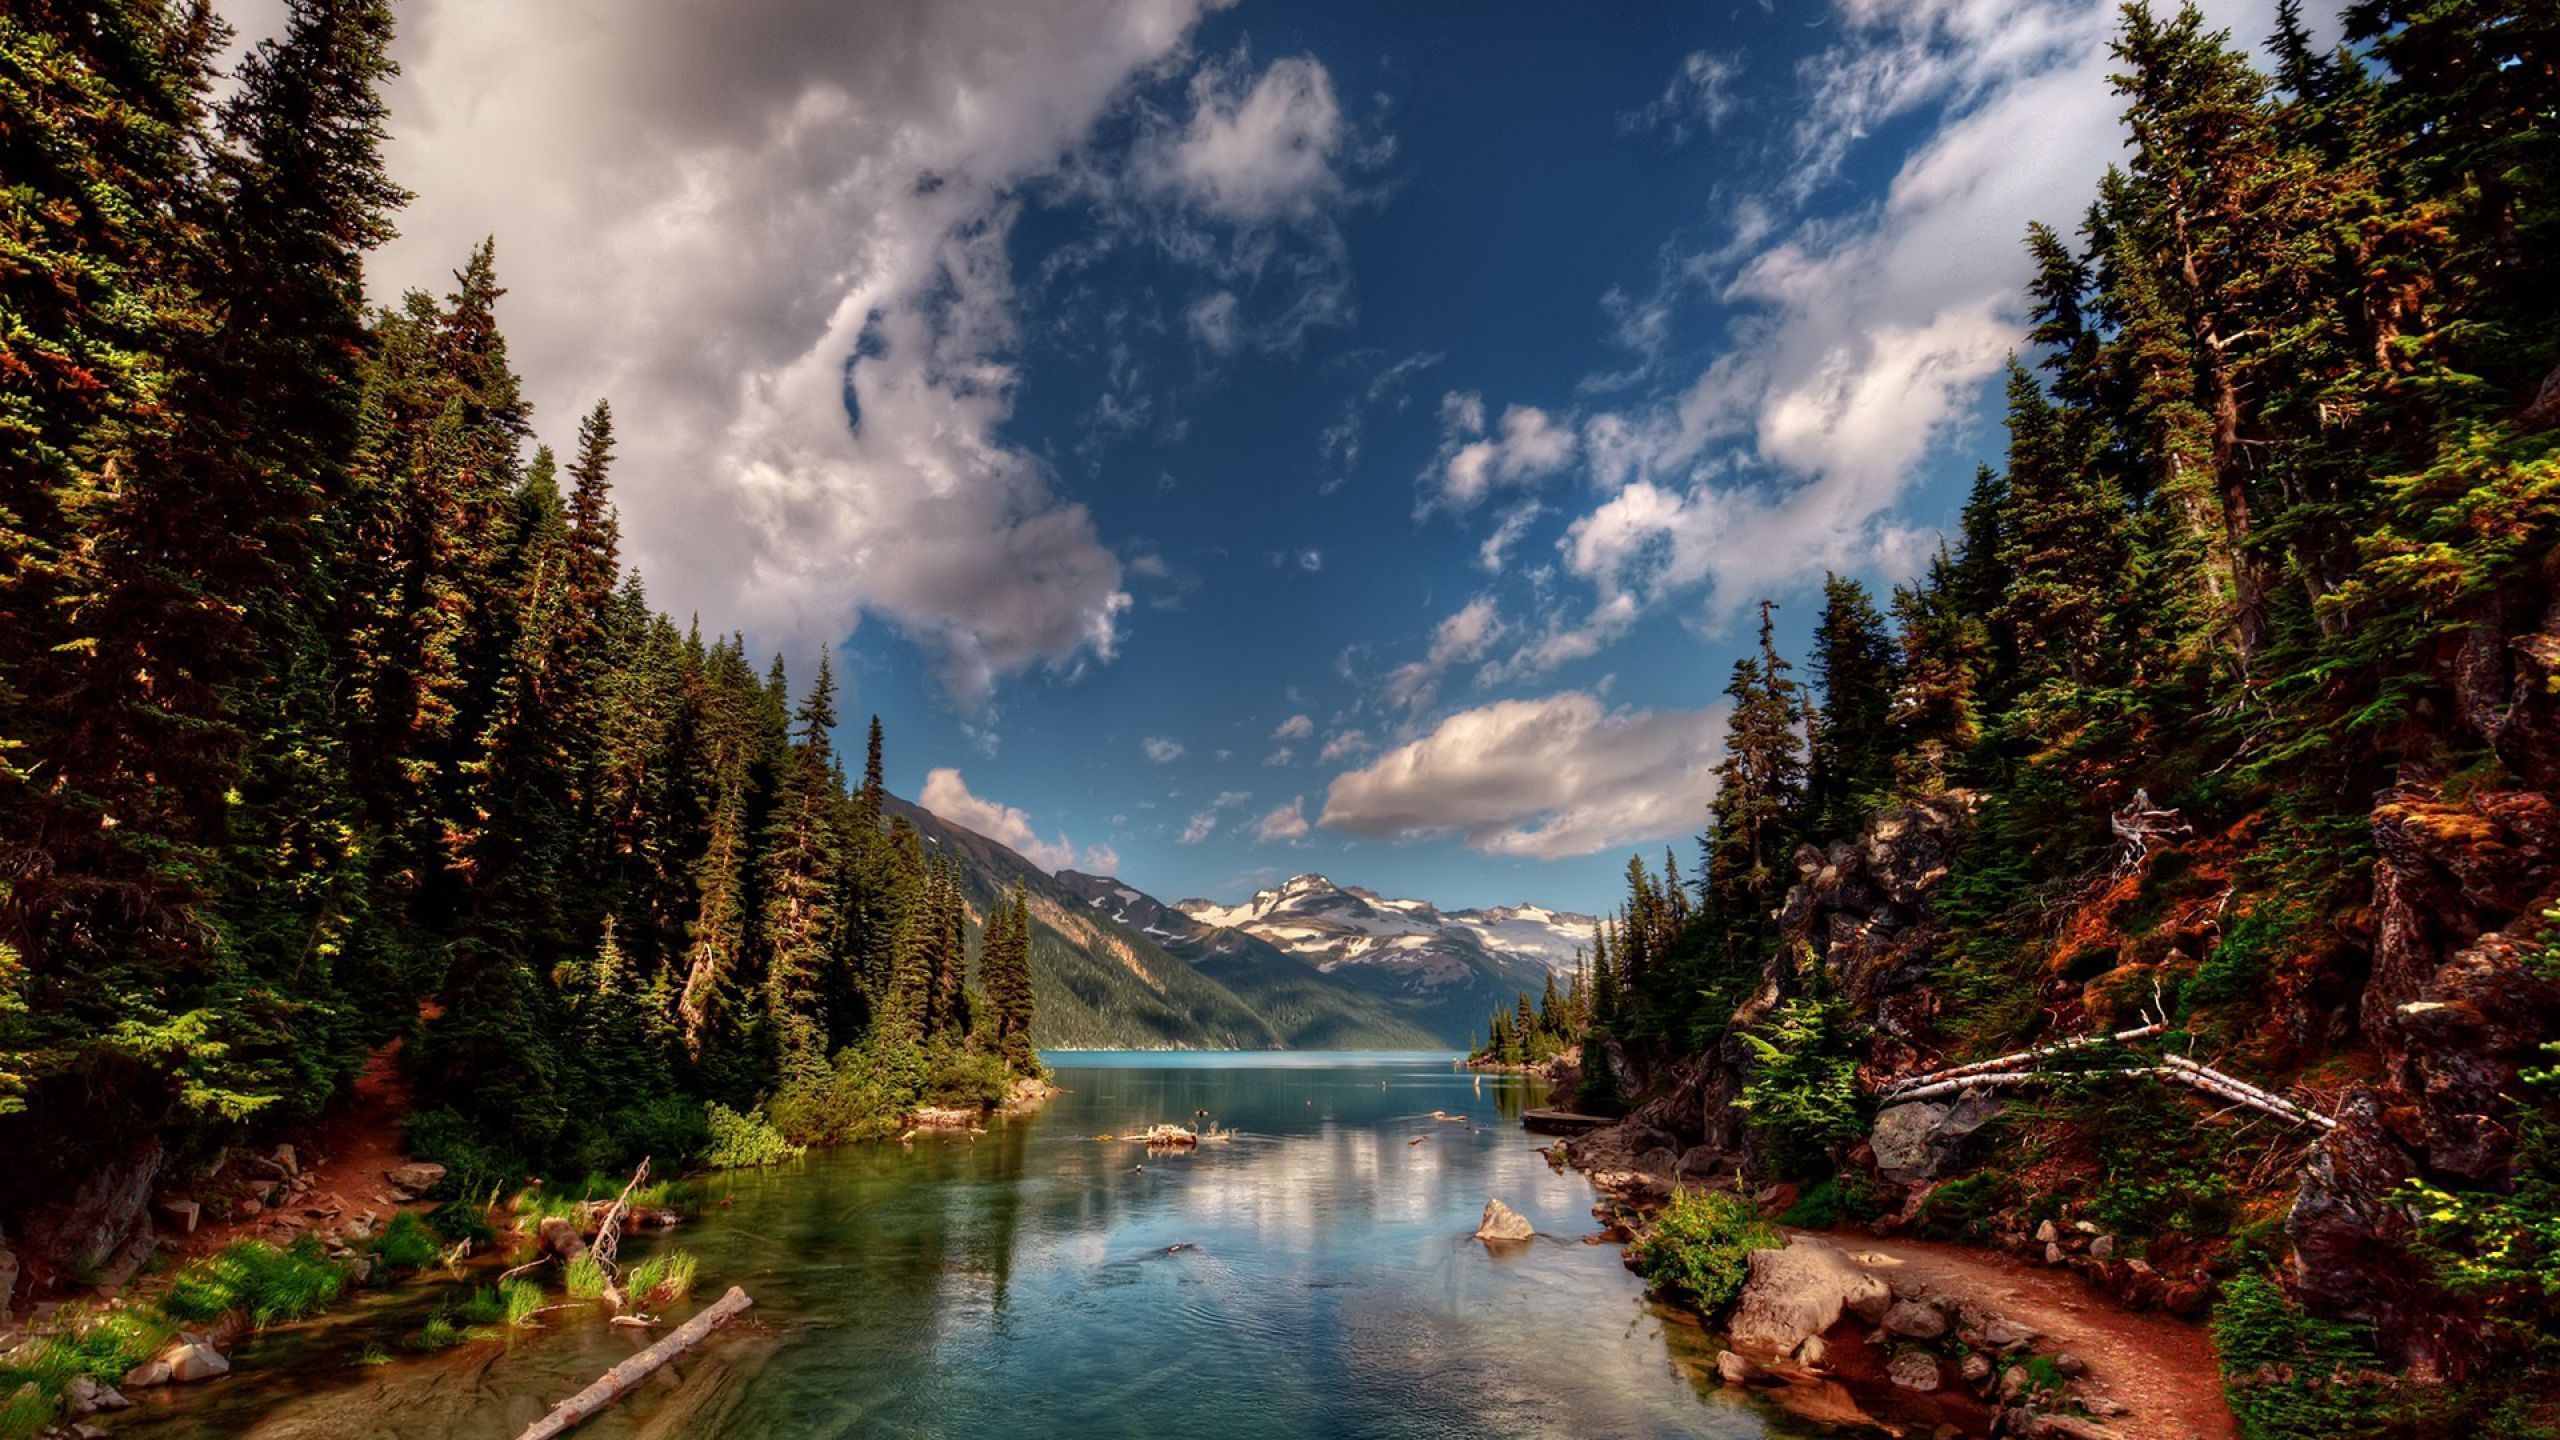 Download Wallpaper 2560x1440 Mountains, Nature, Sky, River ...